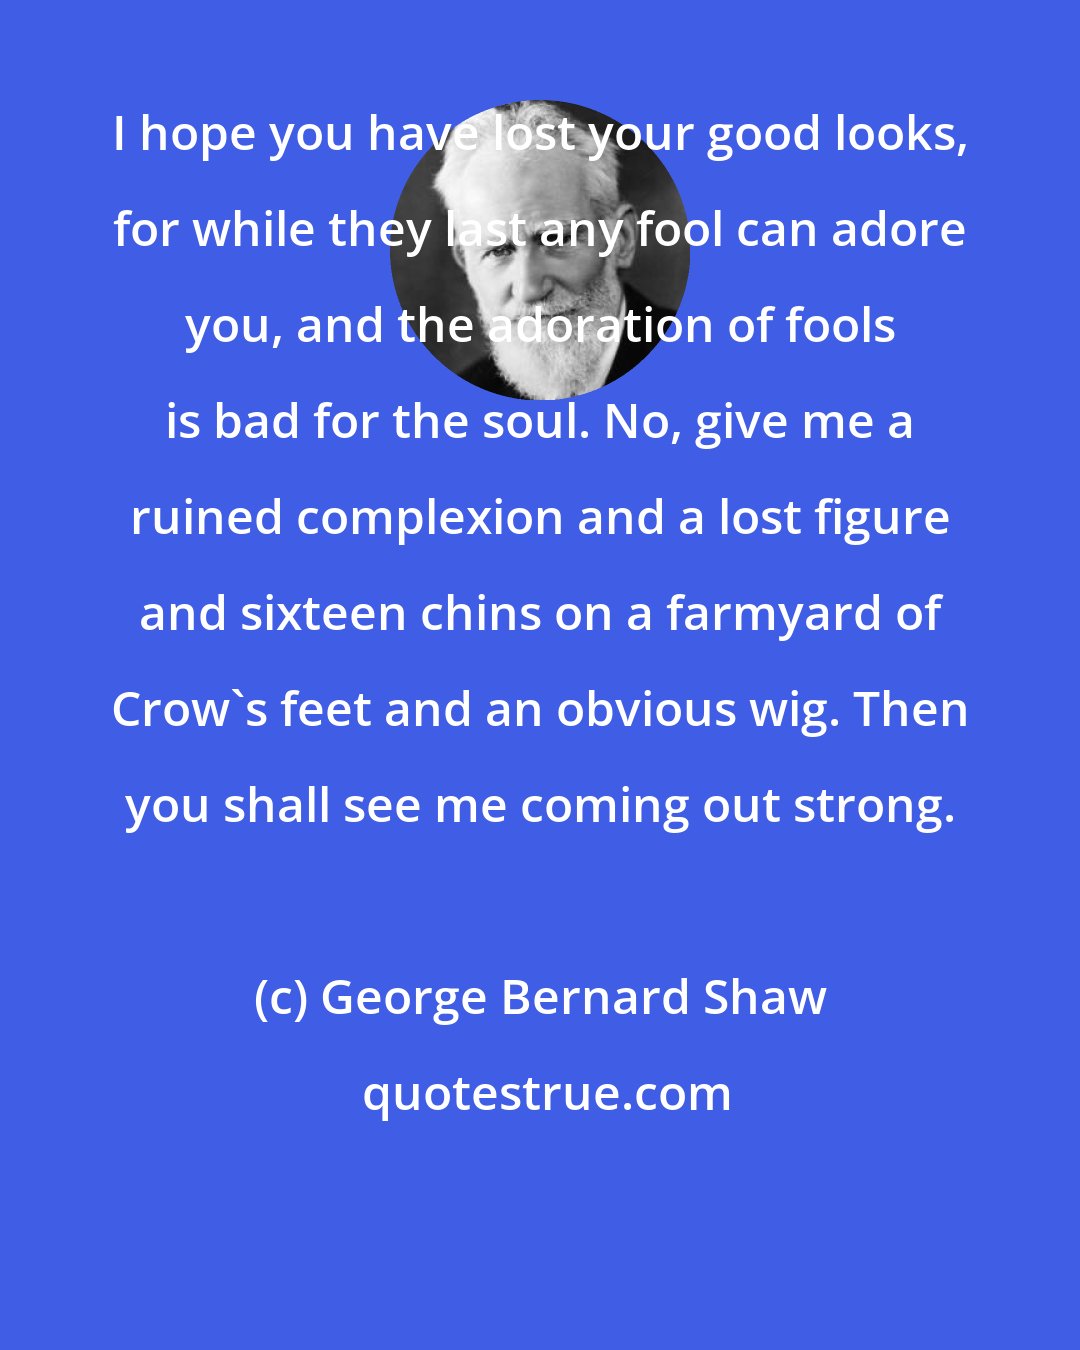 George Bernard Shaw: I hope you have lost your good looks, for while they last any fool can adore you, and the adoration of fools is bad for the soul. No, give me a ruined complexion and a lost figure and sixteen chins on a farmyard of Crow's feet and an obvious wig. Then you shall see me coming out strong.